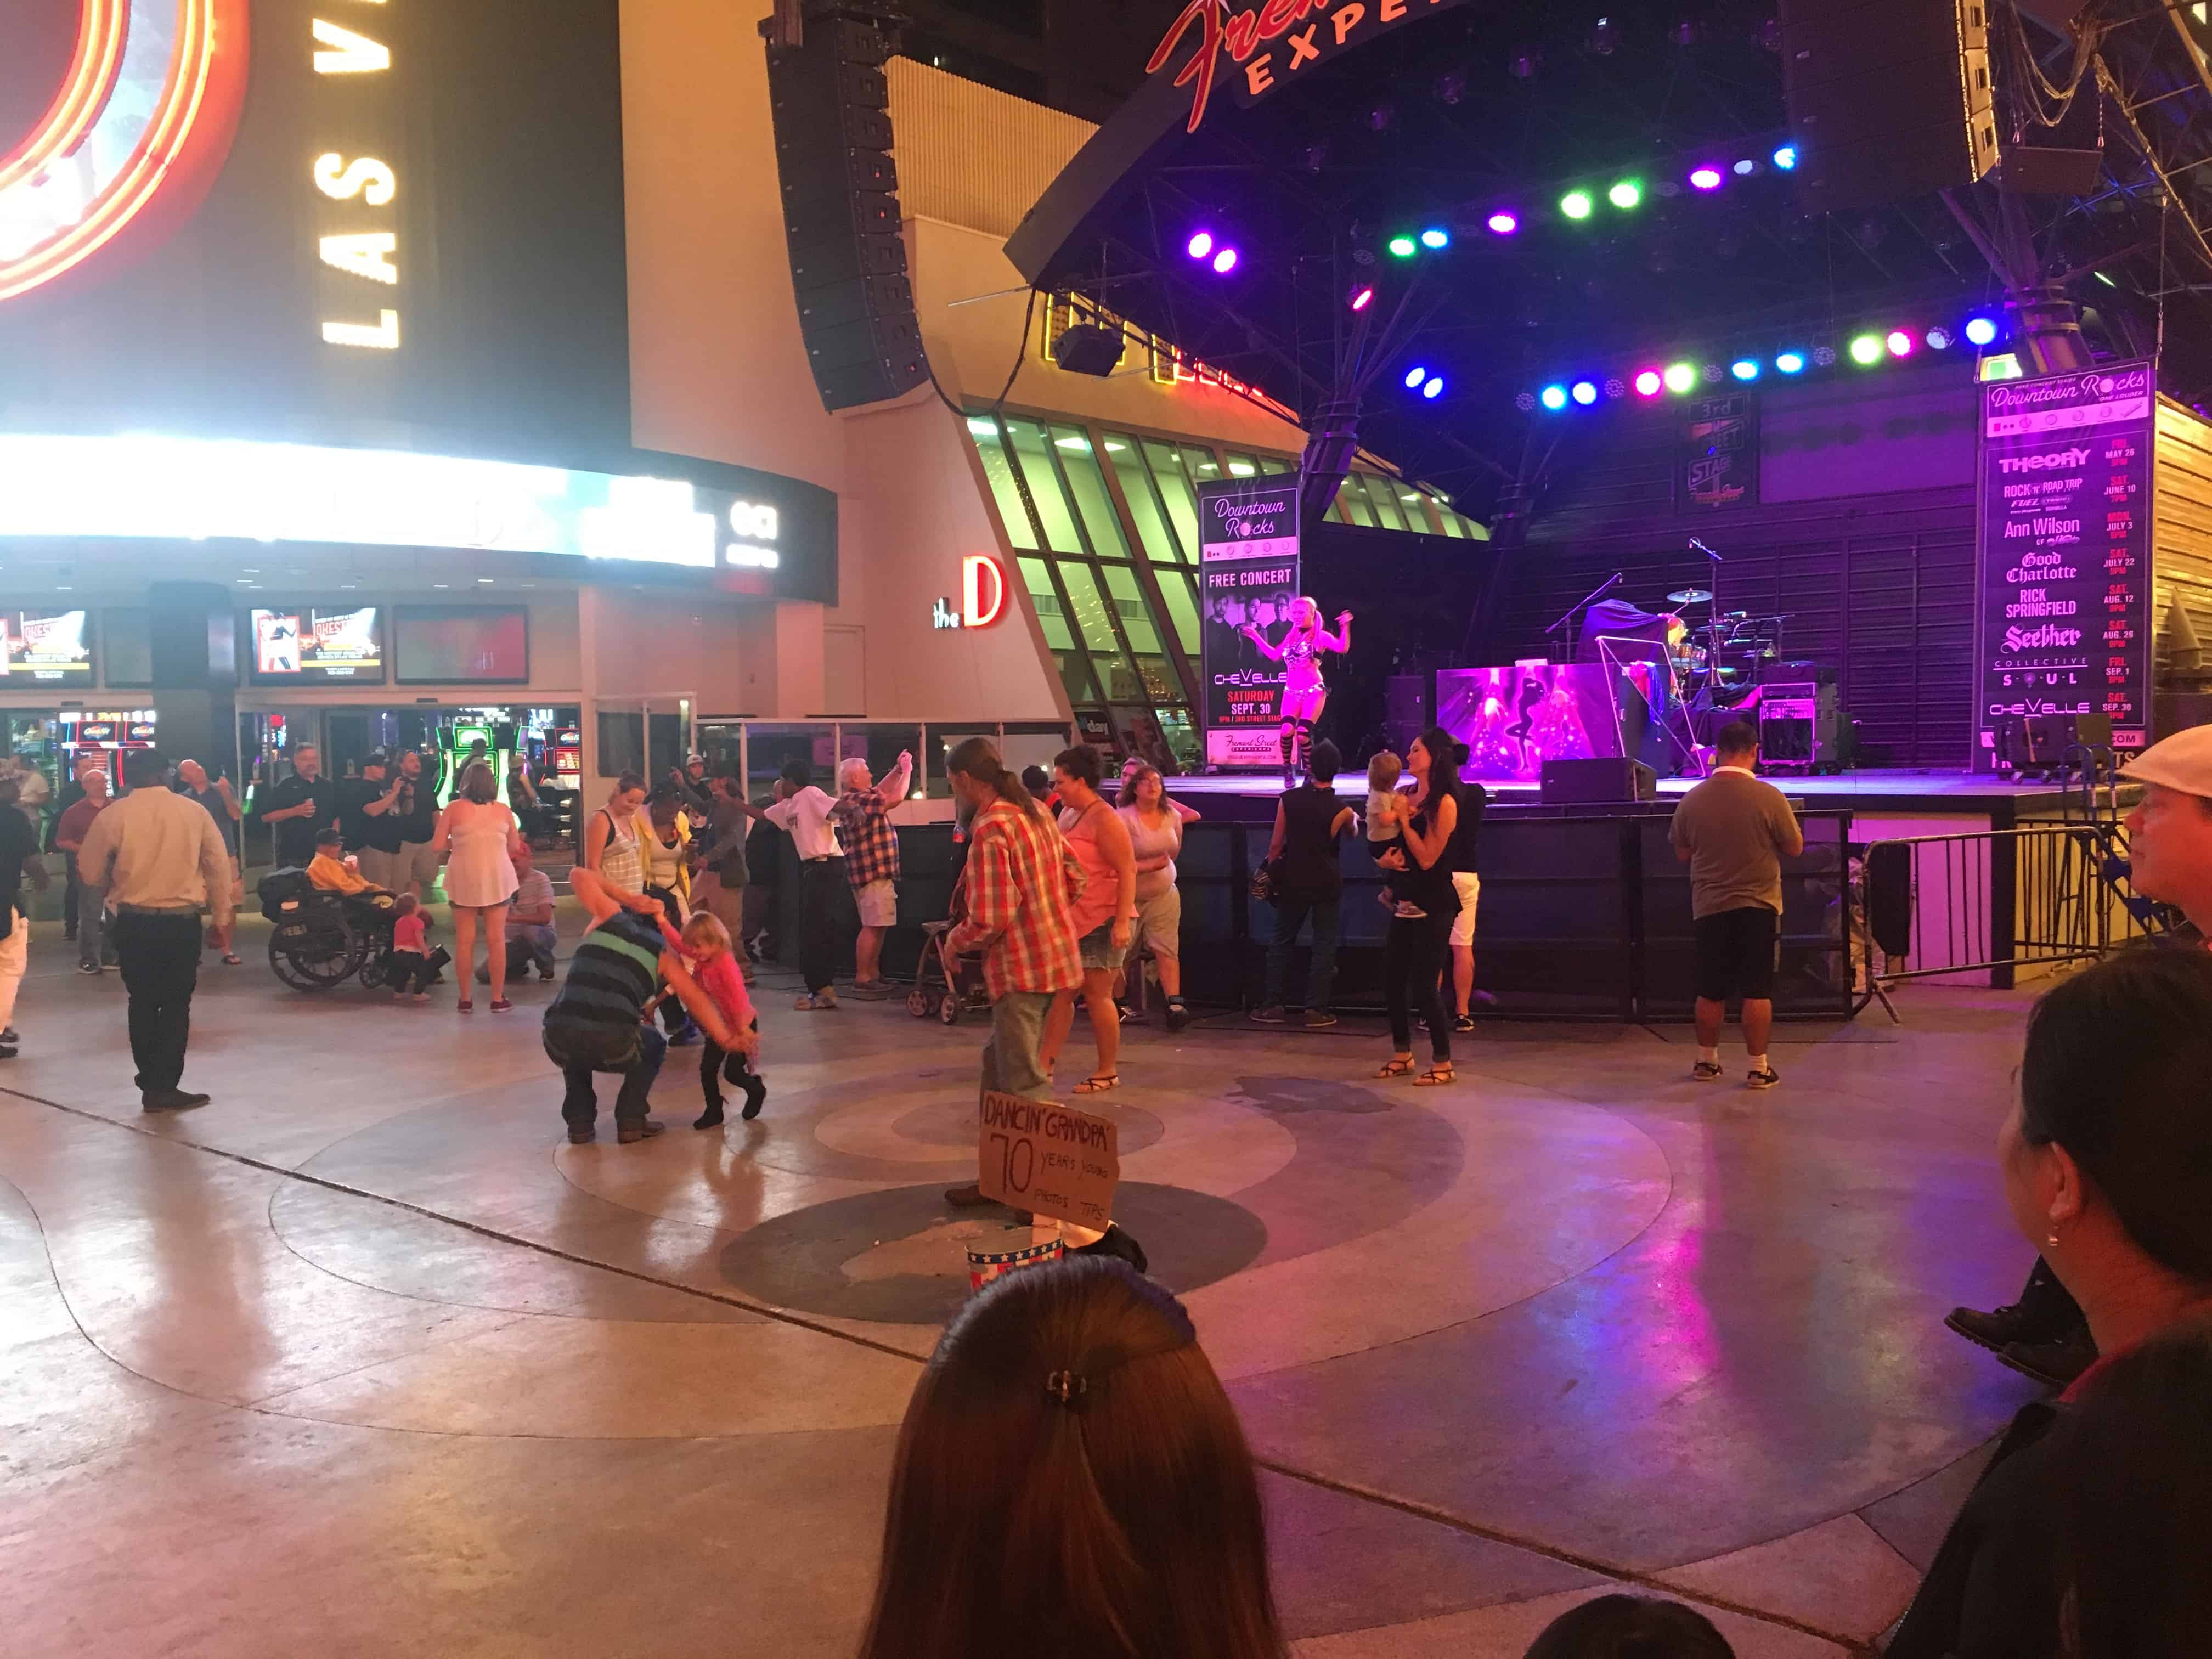 Live band at the Fremont Street Experience in Las Vegas, Nevada